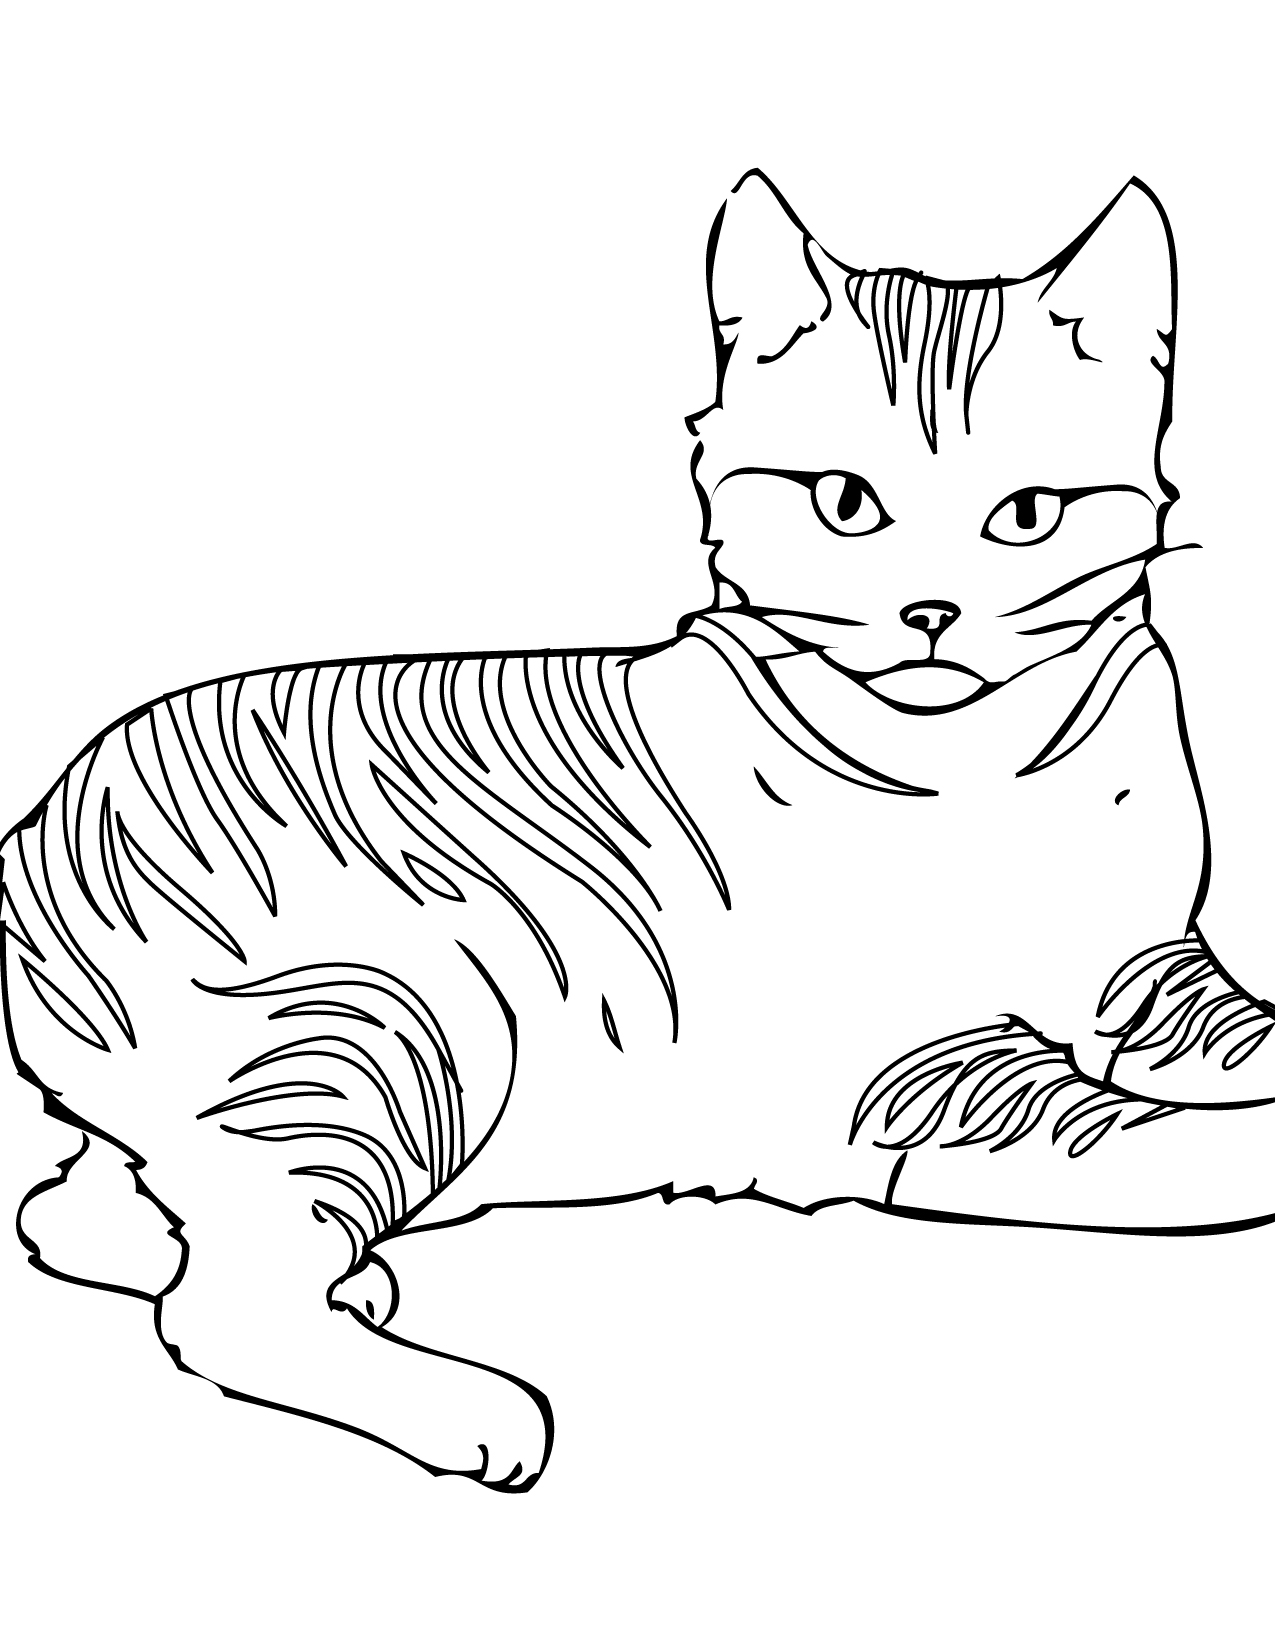 Free Printable Cat Coloring Pages For Kids HD Wallpapers Download Free Images Wallpaper [wallpaper896.blogspot.com]